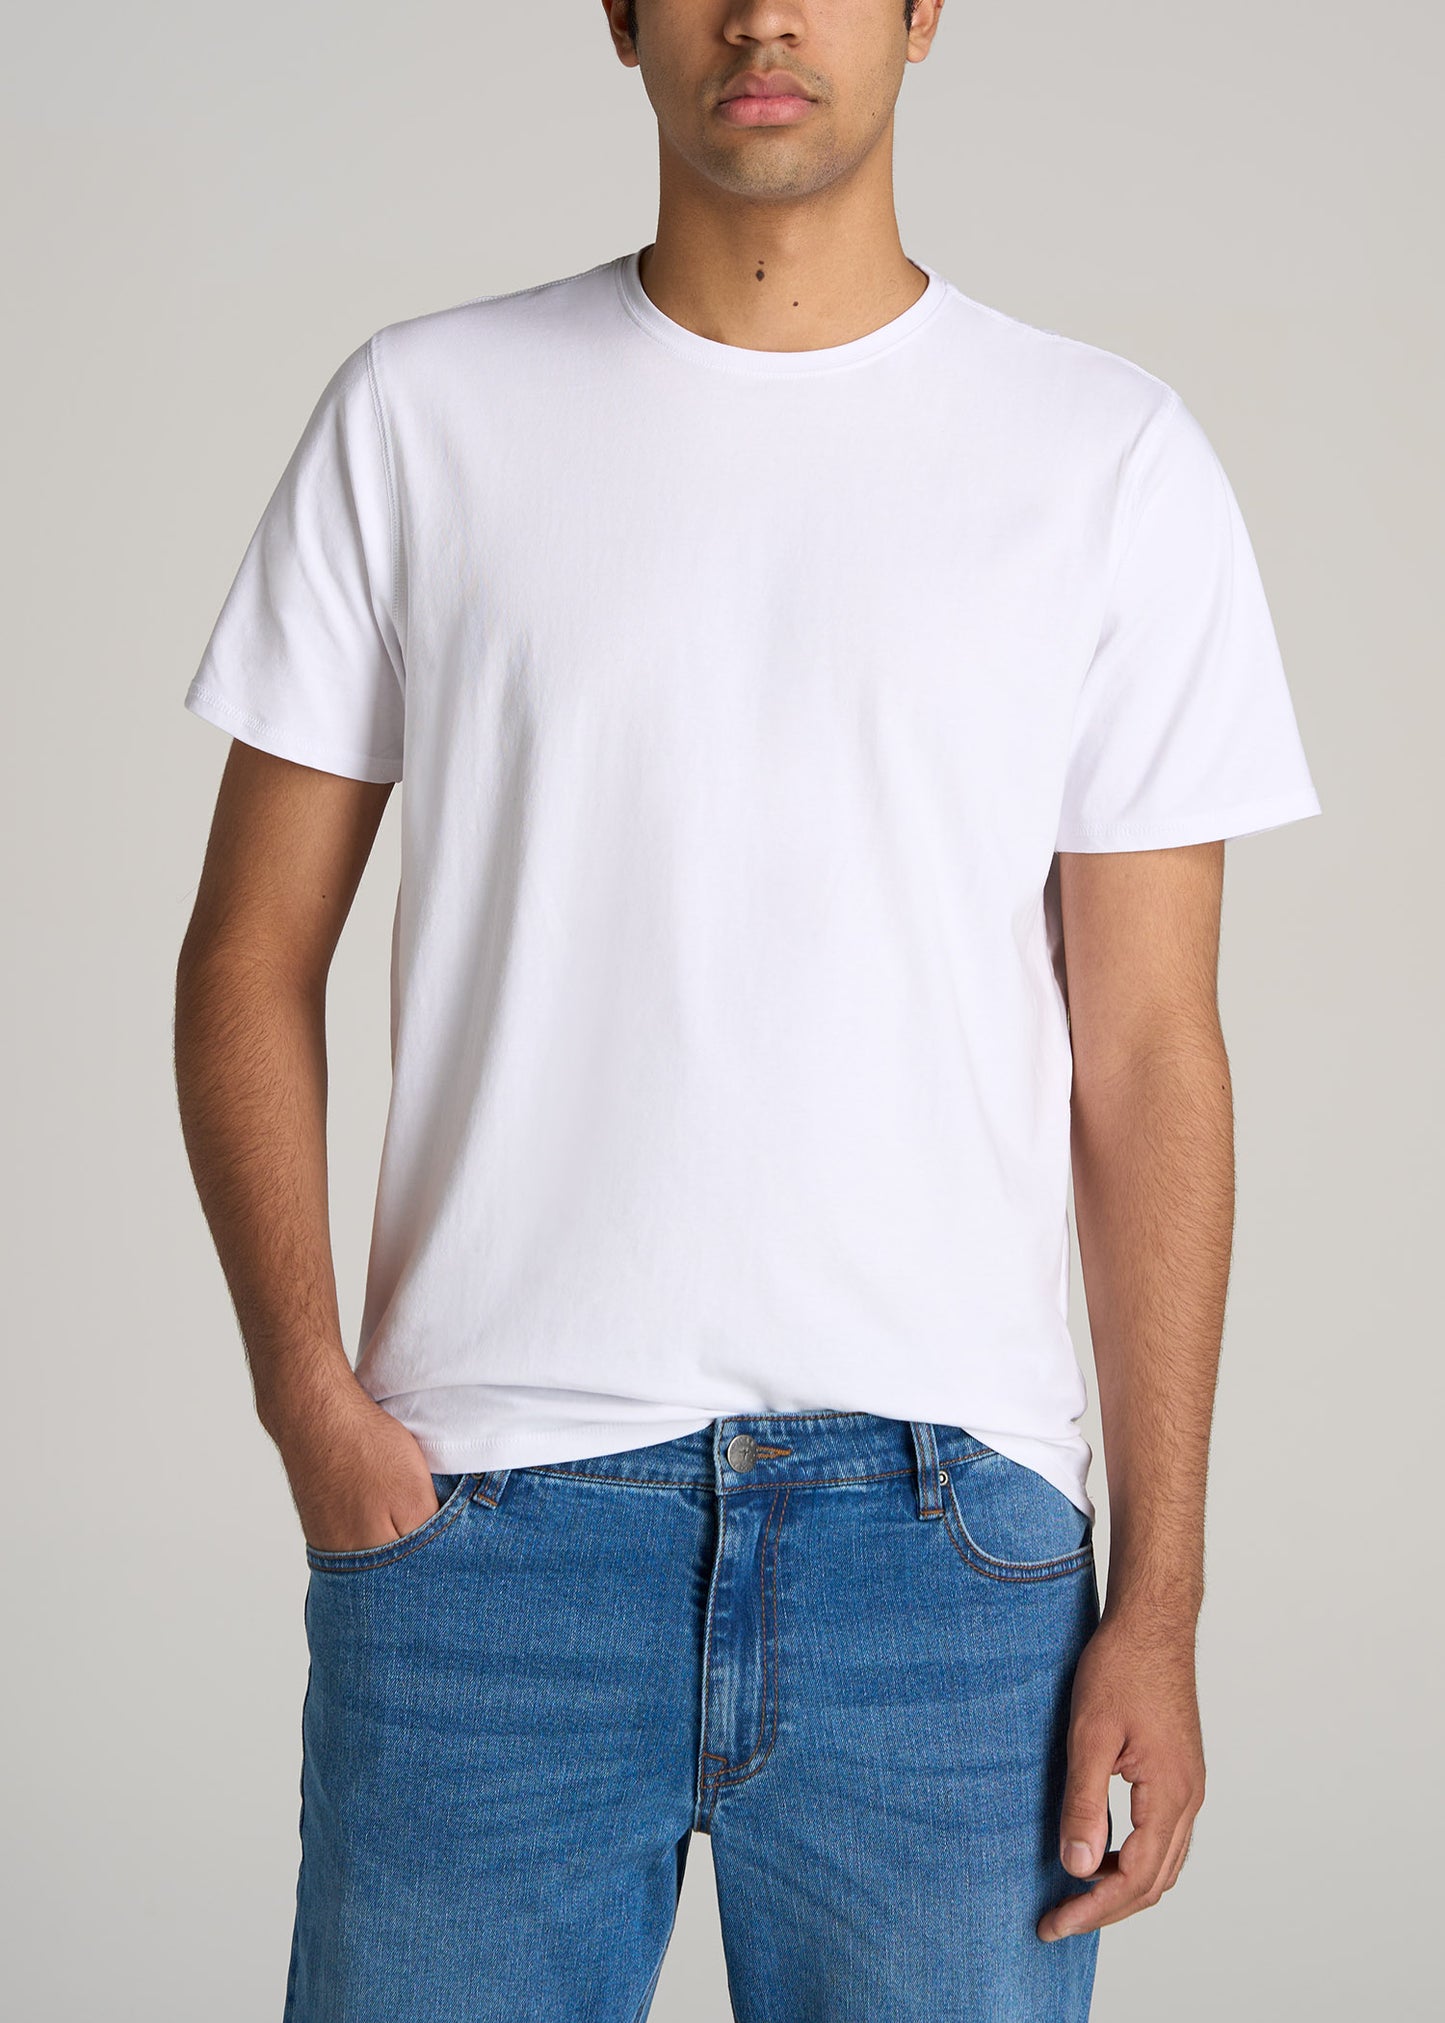 The Essential REGULAR-FIT Crew-Neck Men's Tall Tees in White